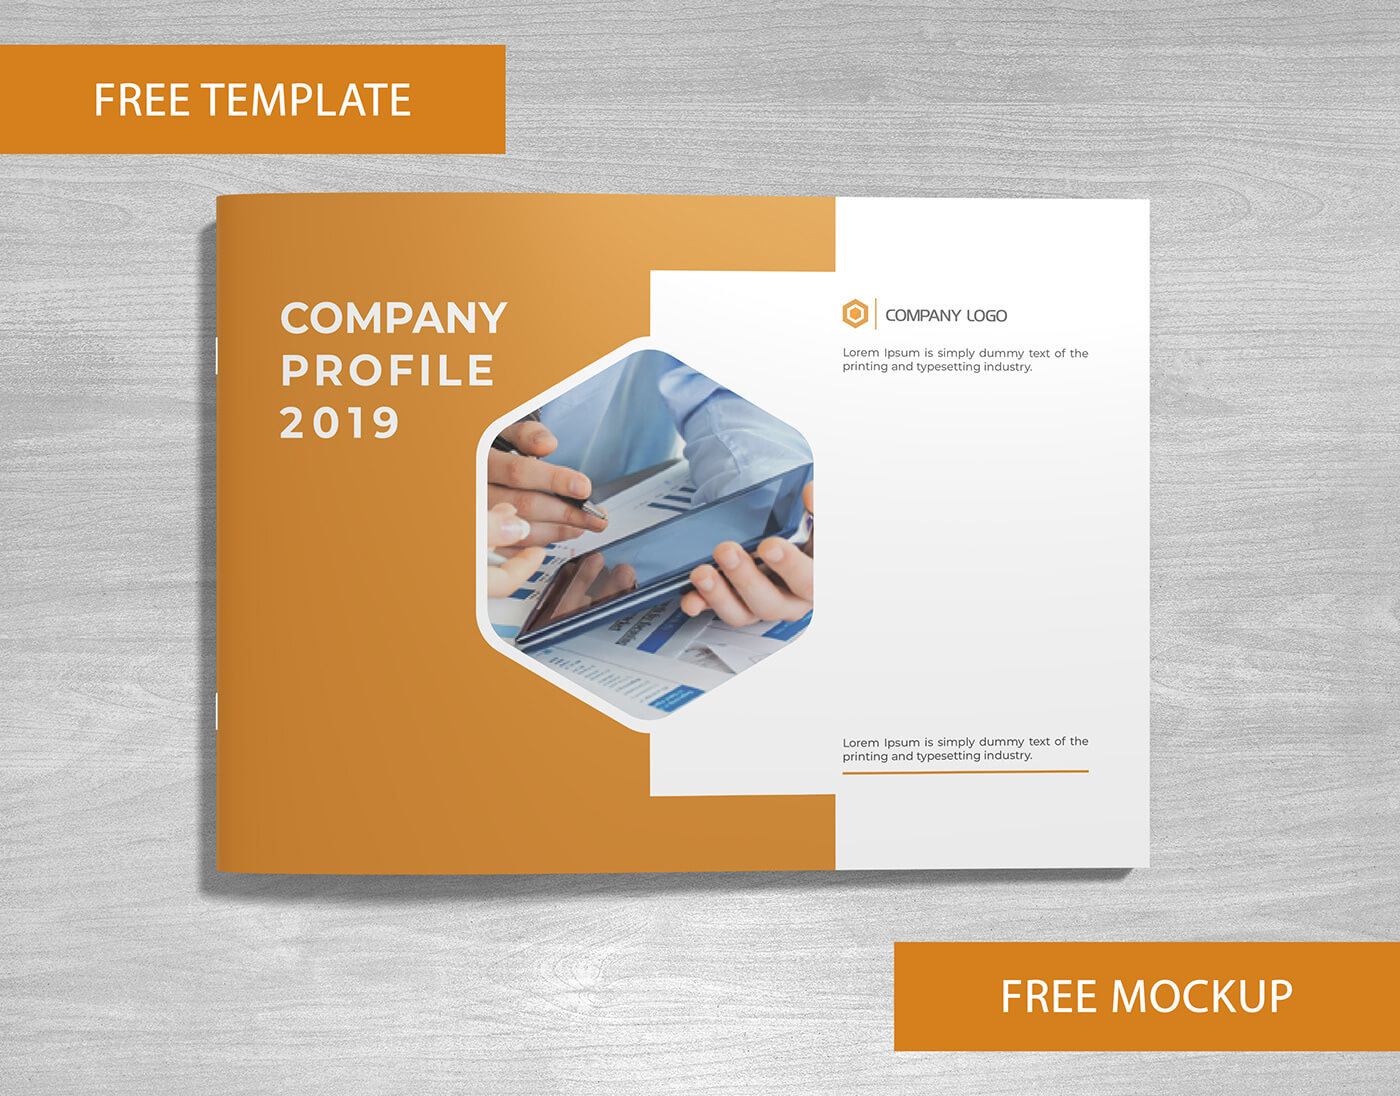 Company Profile Free Template And Mockup Download On Behance Inside Creative Brochure Templates Free Download